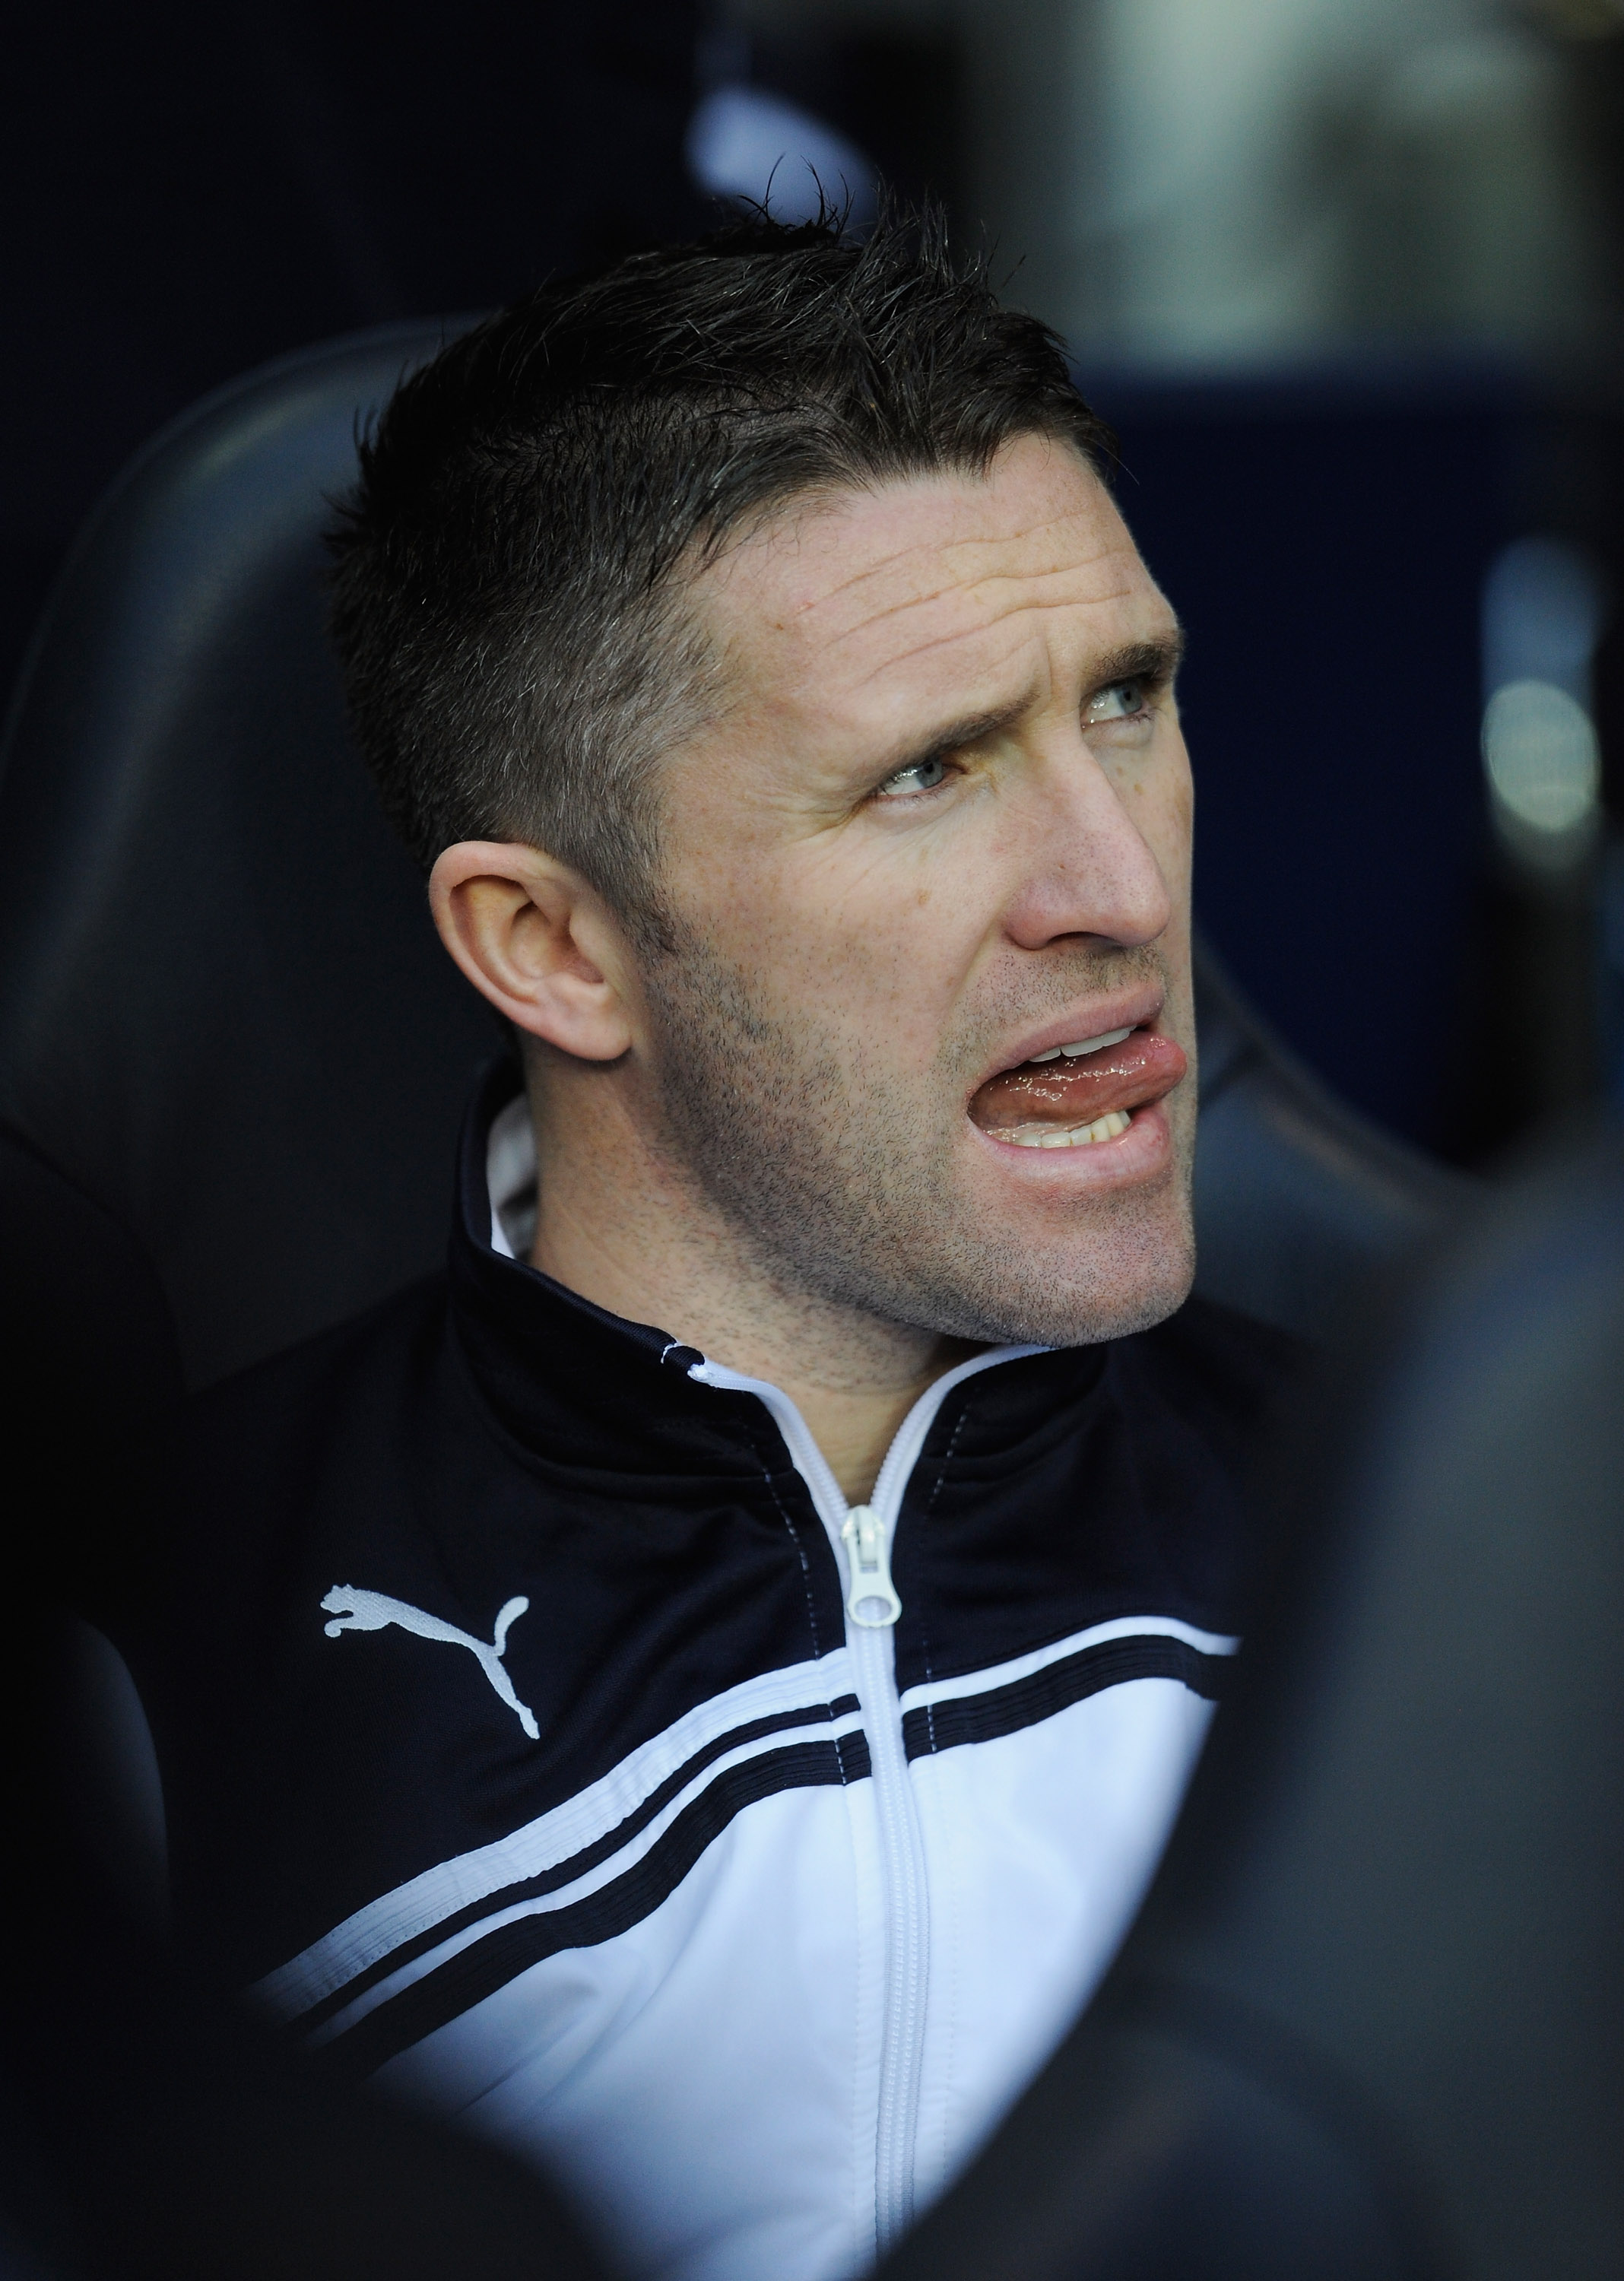 LONDON, ENGLAND - DECEMBER 28: Robbie Keane of Tottenham Hotspur looks on from the bench ahead of the Barclays Premier League match between Tottenham Hotspur and Newcastle United at White Hart Lane on December 28, 2010 in London, England.  (Photo by Micha